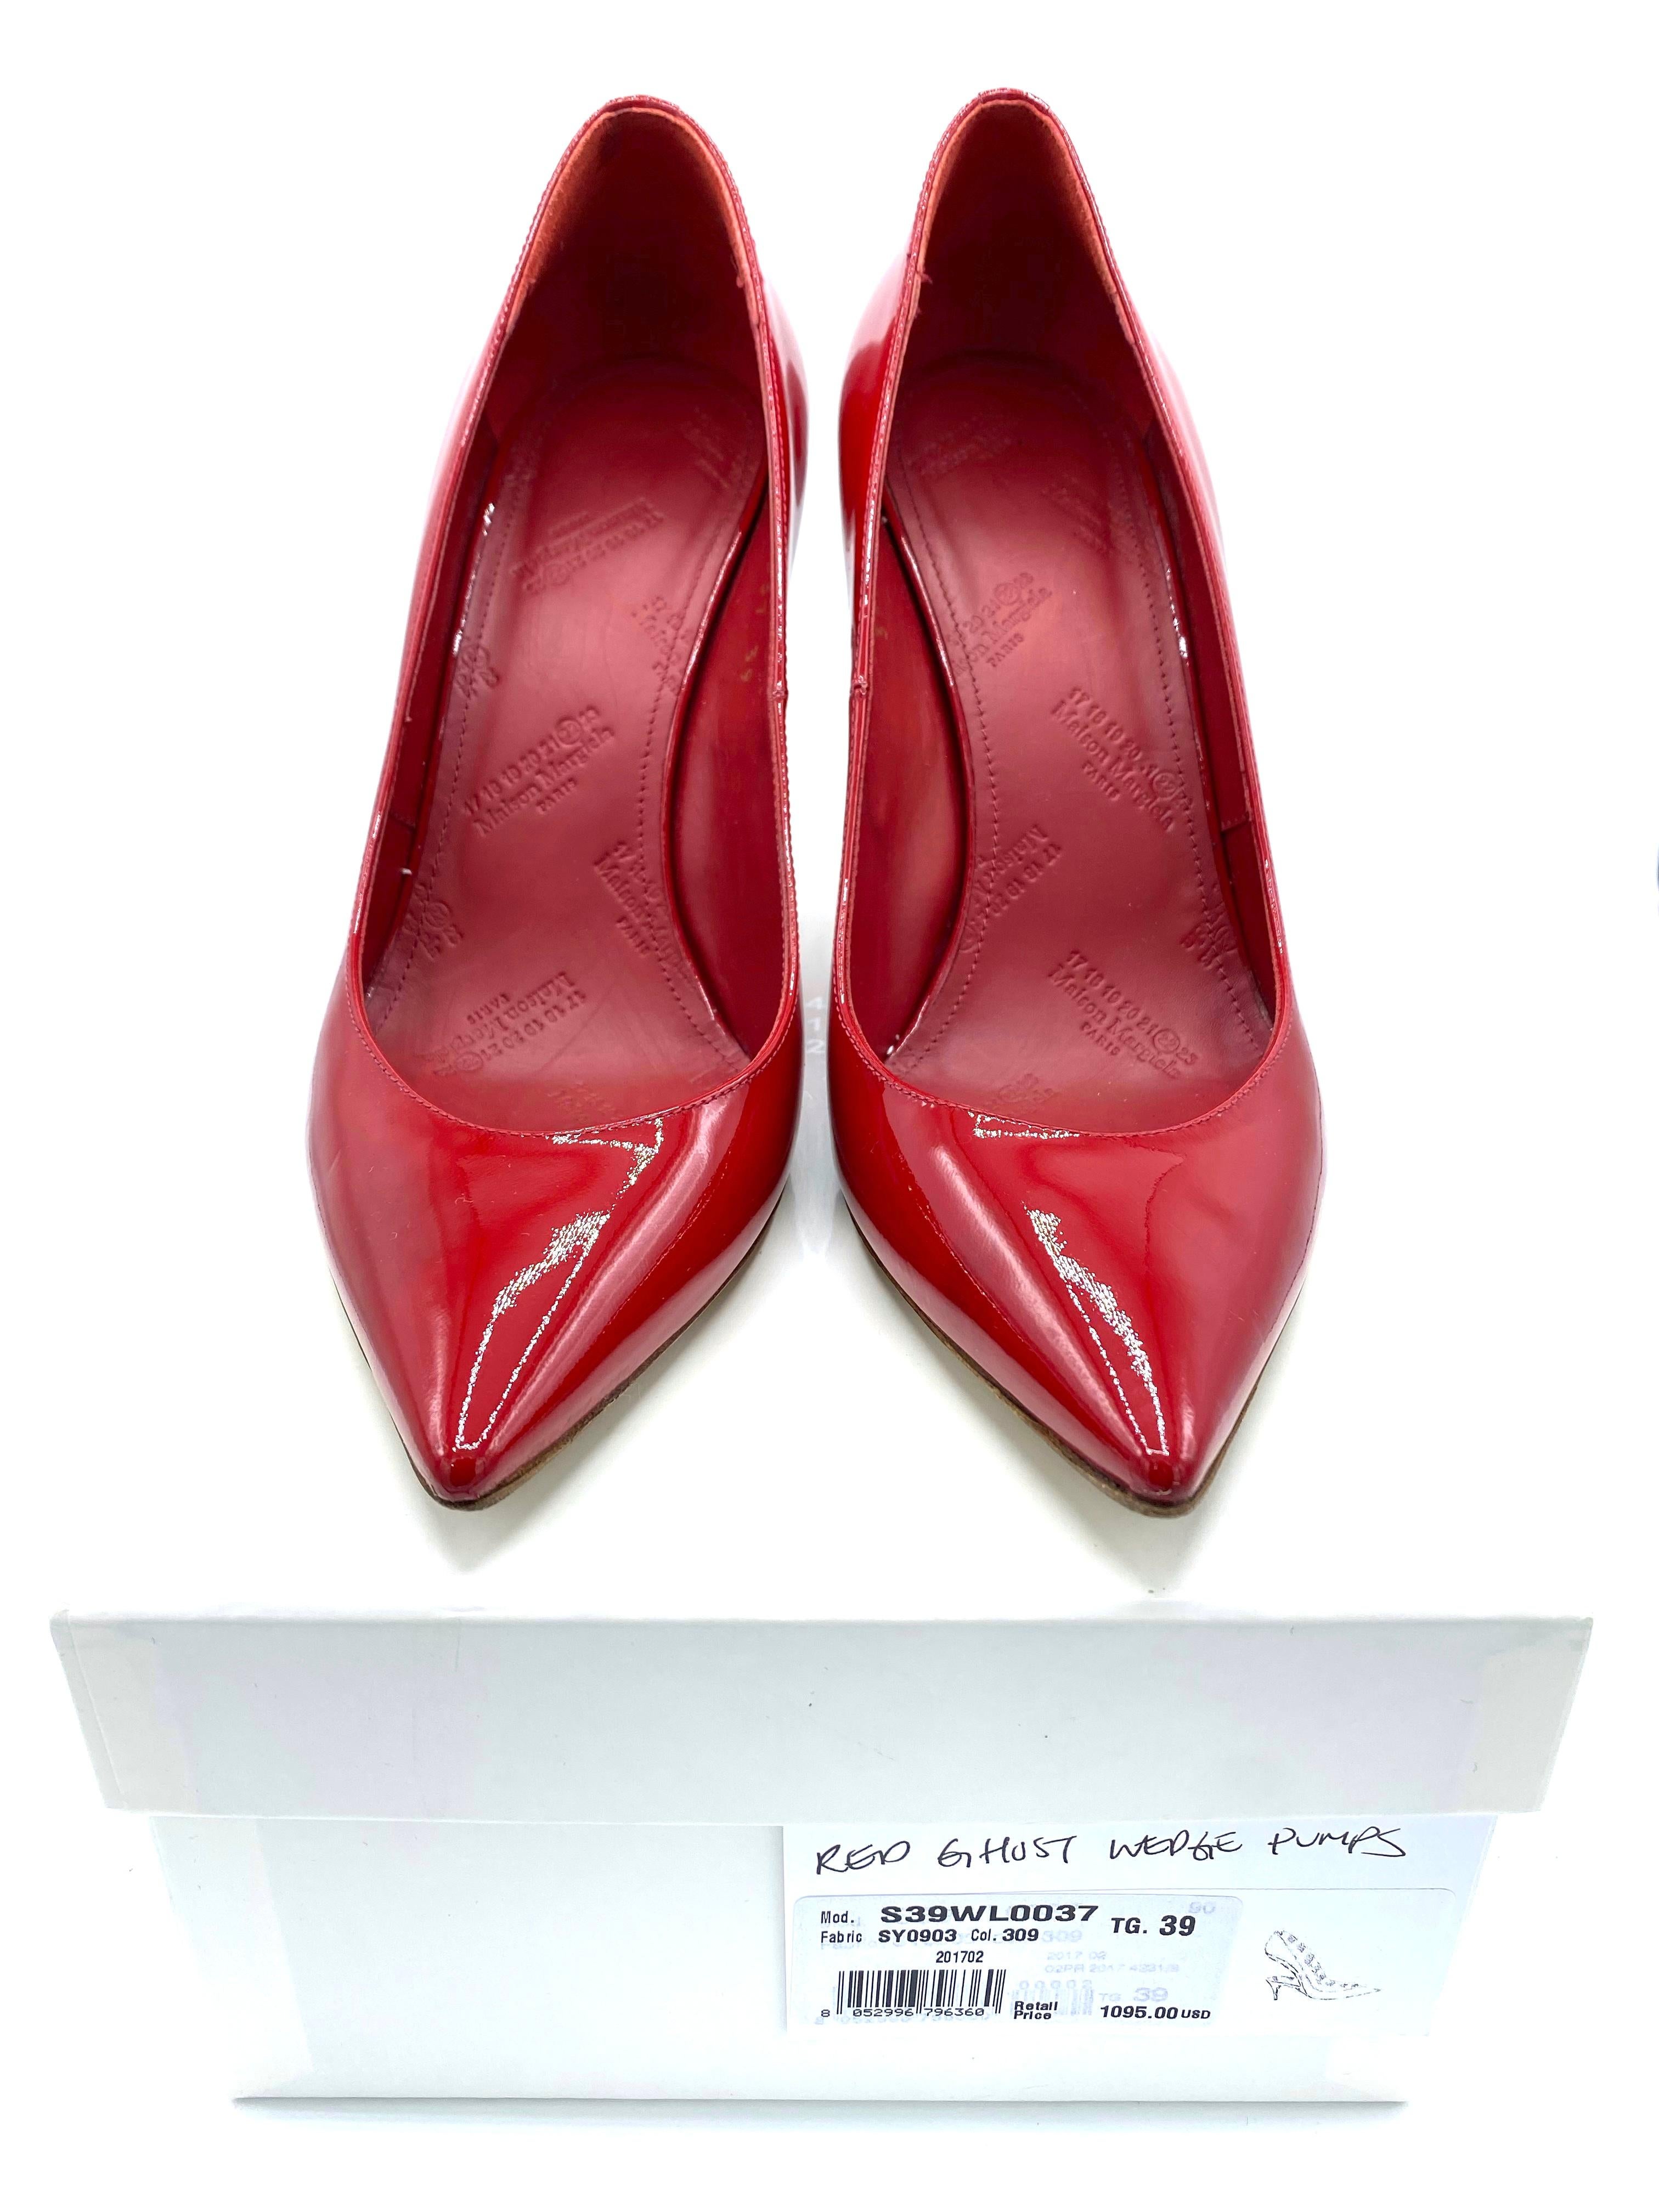 Maison Margiela Red Patent Leather Pump Heels Size 38 For Sale 4